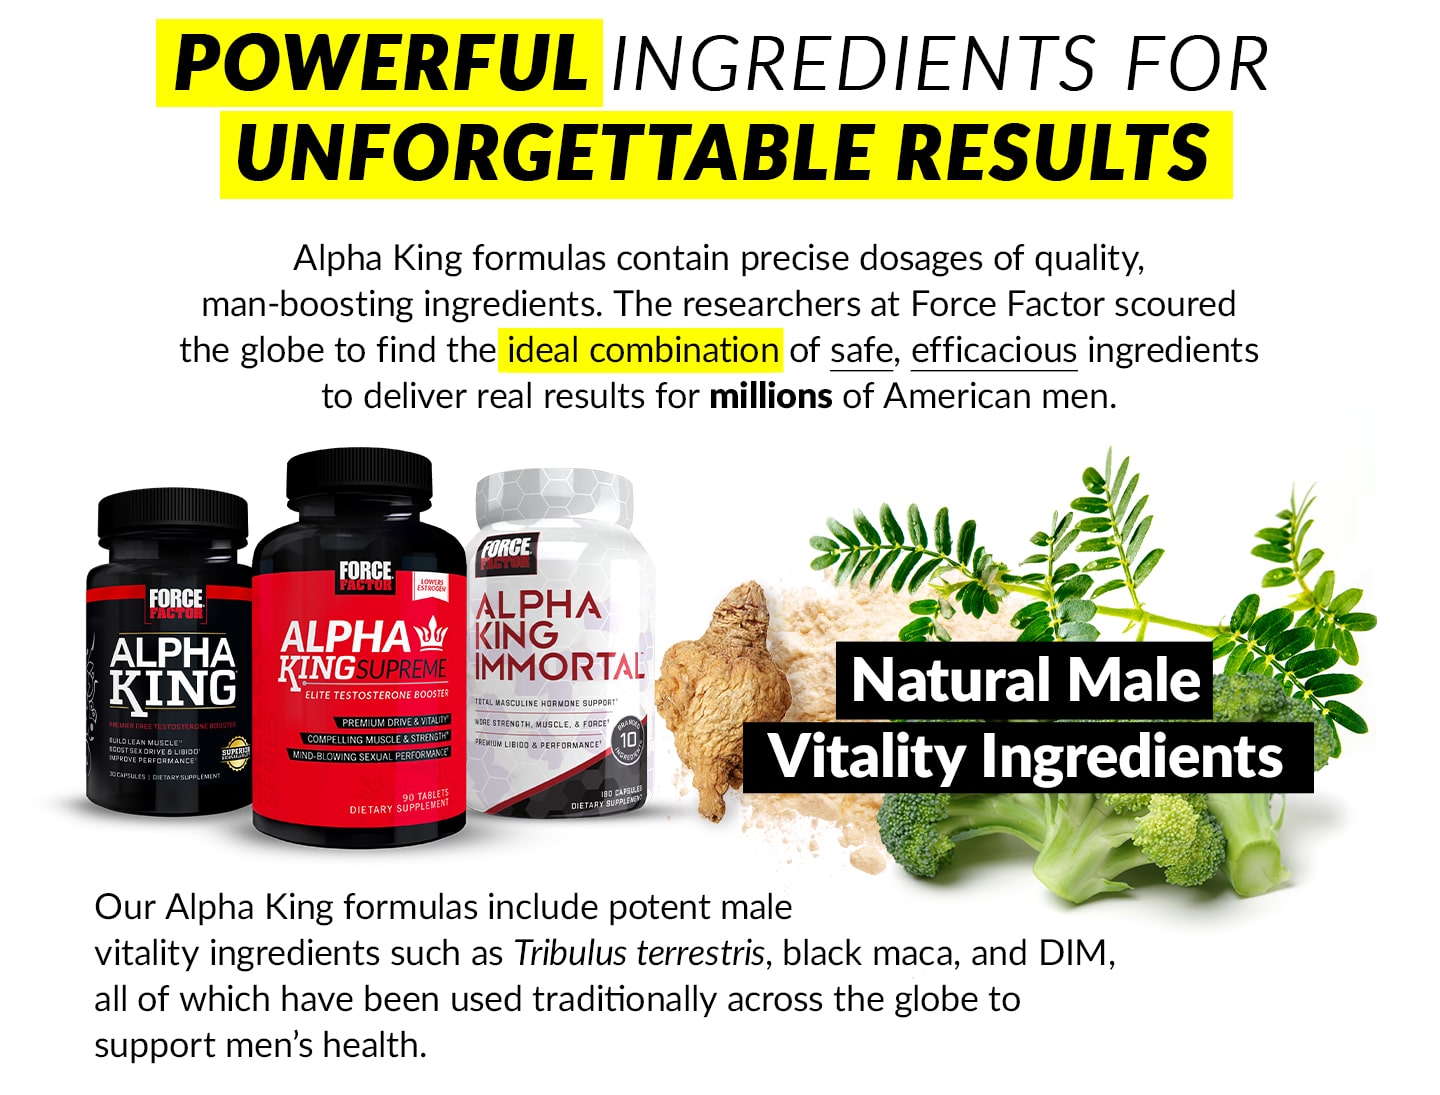 POWERFUL INGREDIENTS FOR UNFORGETTABLE RESULTS - Alpha King formulas contain precise dosages of quality, man-boosting ingredients. The researchers at Force Factor scoured the globe to find the ideal combination of safe, efficacious ingredients to deliver real results for millions of American men. Natural Male Vitality Ingredients - Our Alpha King formulas include potent male vitality ingredients such as Tribulus terrestris, black maca, and DIM, all of which have been used traditionally across the globe to support men’s health.